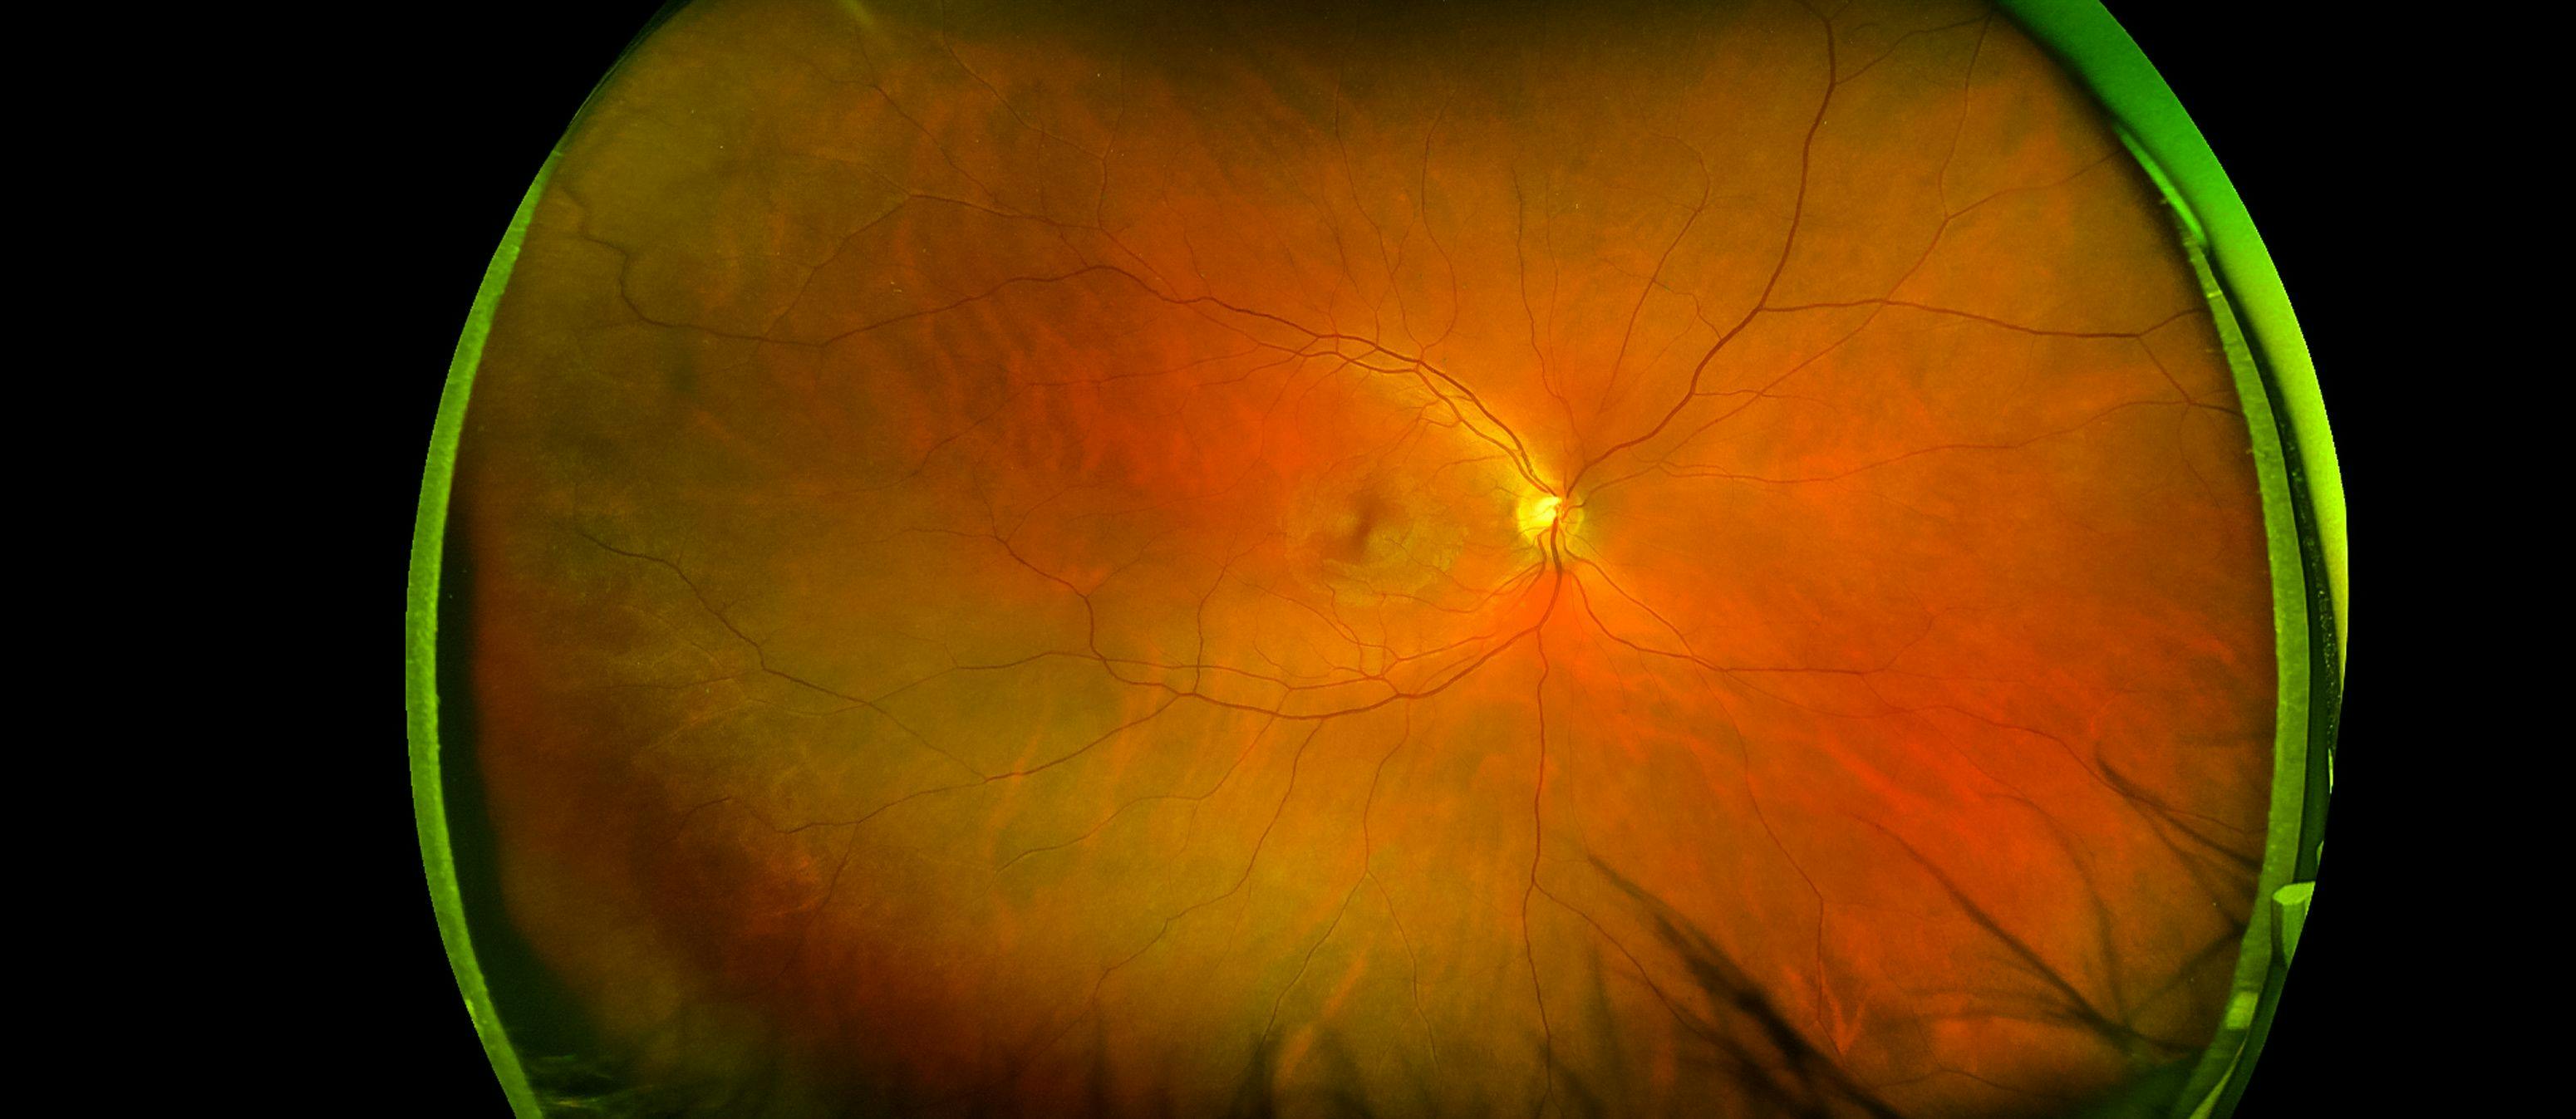 Reti-Intelligence uses a simple fundus camera to capture images of the eye, and then within one minute the AI algorithm provides the disease risk assessment. A general practitioner can perform the retina image capture and if high disease risk is detected, the patient can be referred to a specialist for additional testing.